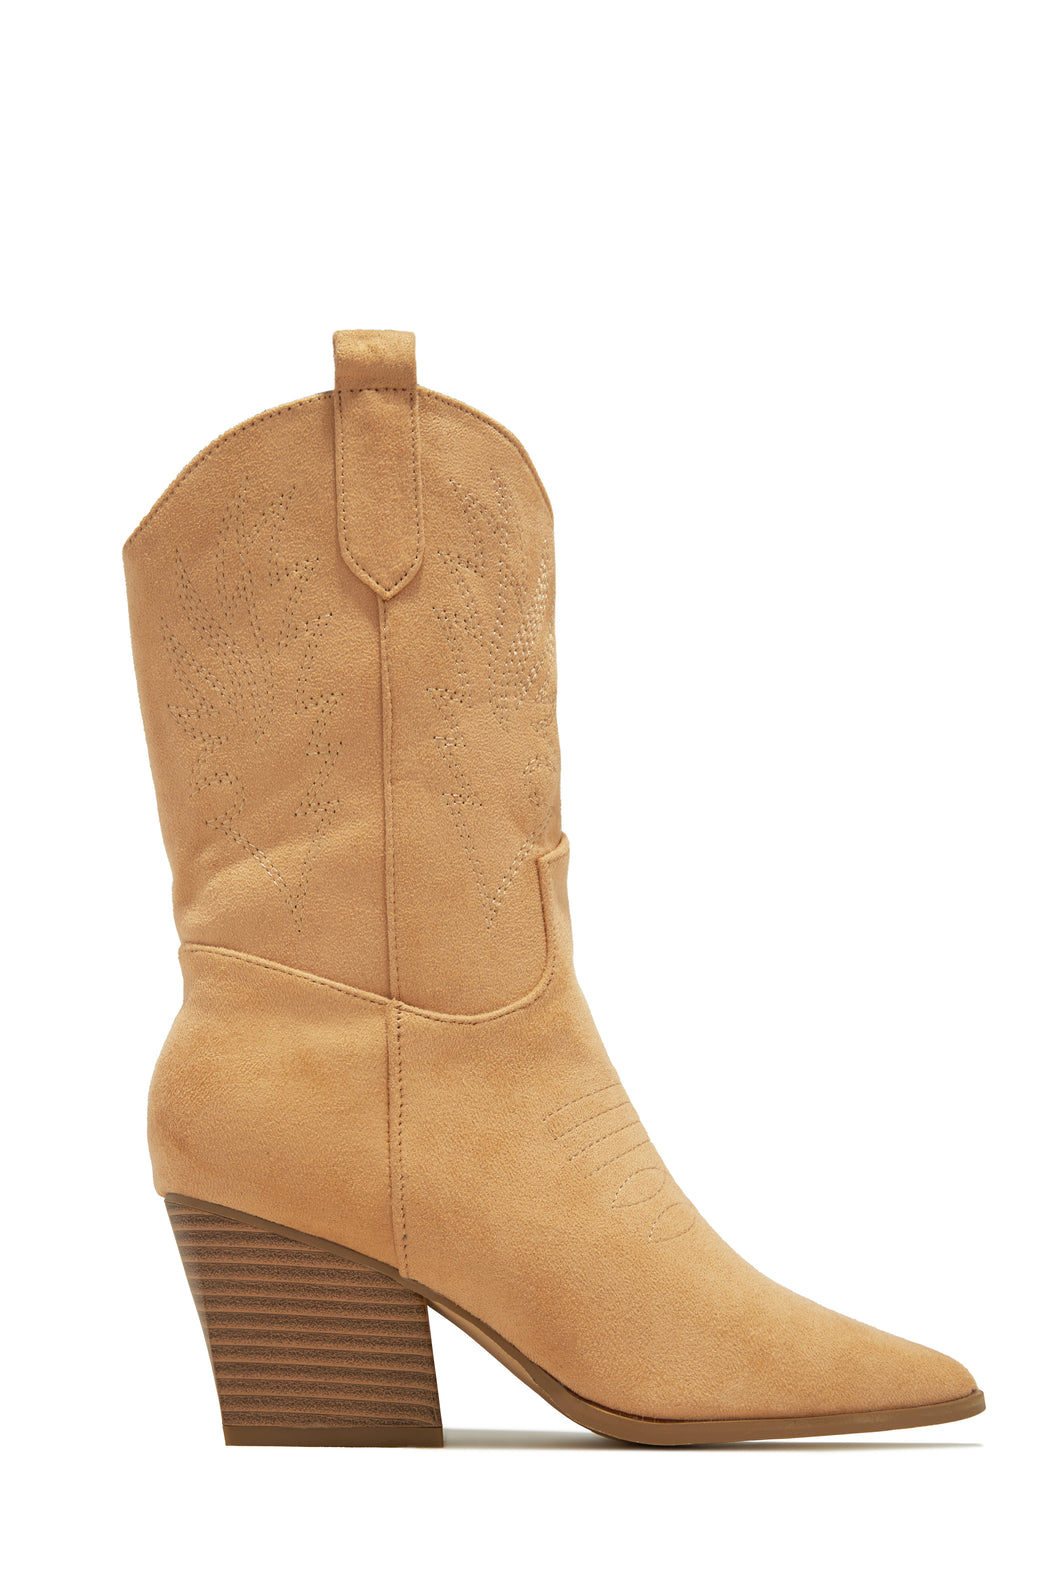 Nude Cowgirl Boots